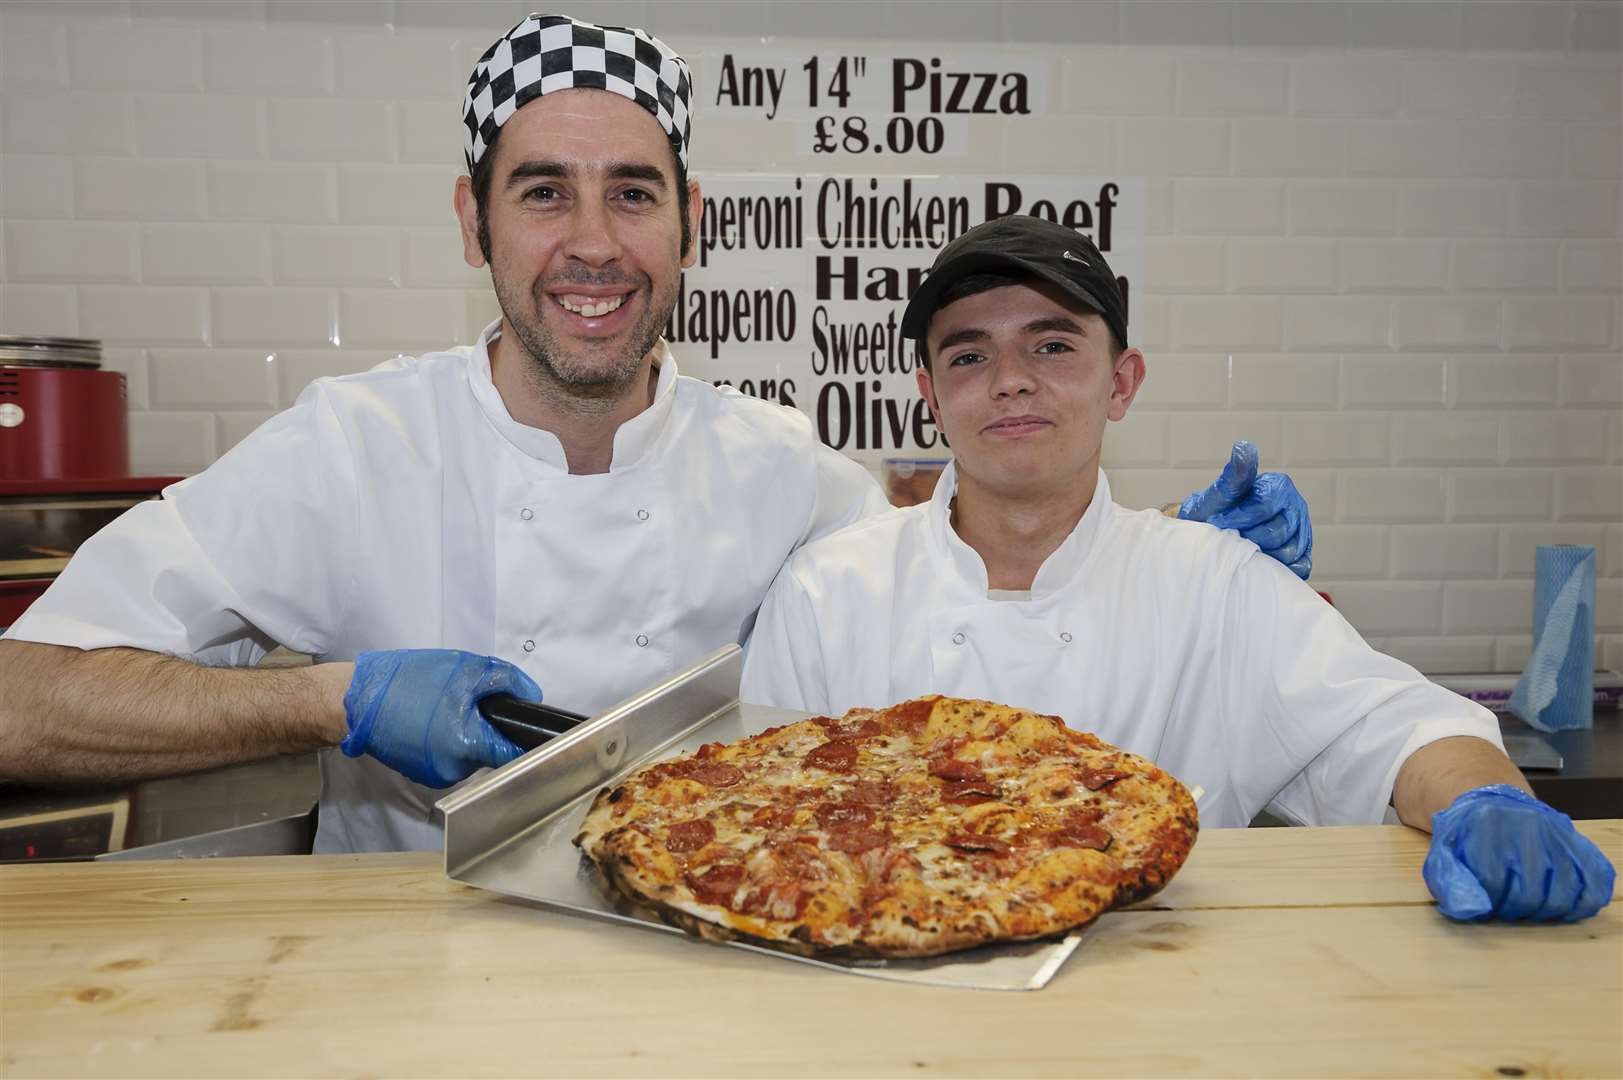 Paddy Collier, left, and Joe Standen. Paddy Pizza has opened in the Street Food section of the Gravesend Borough Market, Queen Street, Gravesend